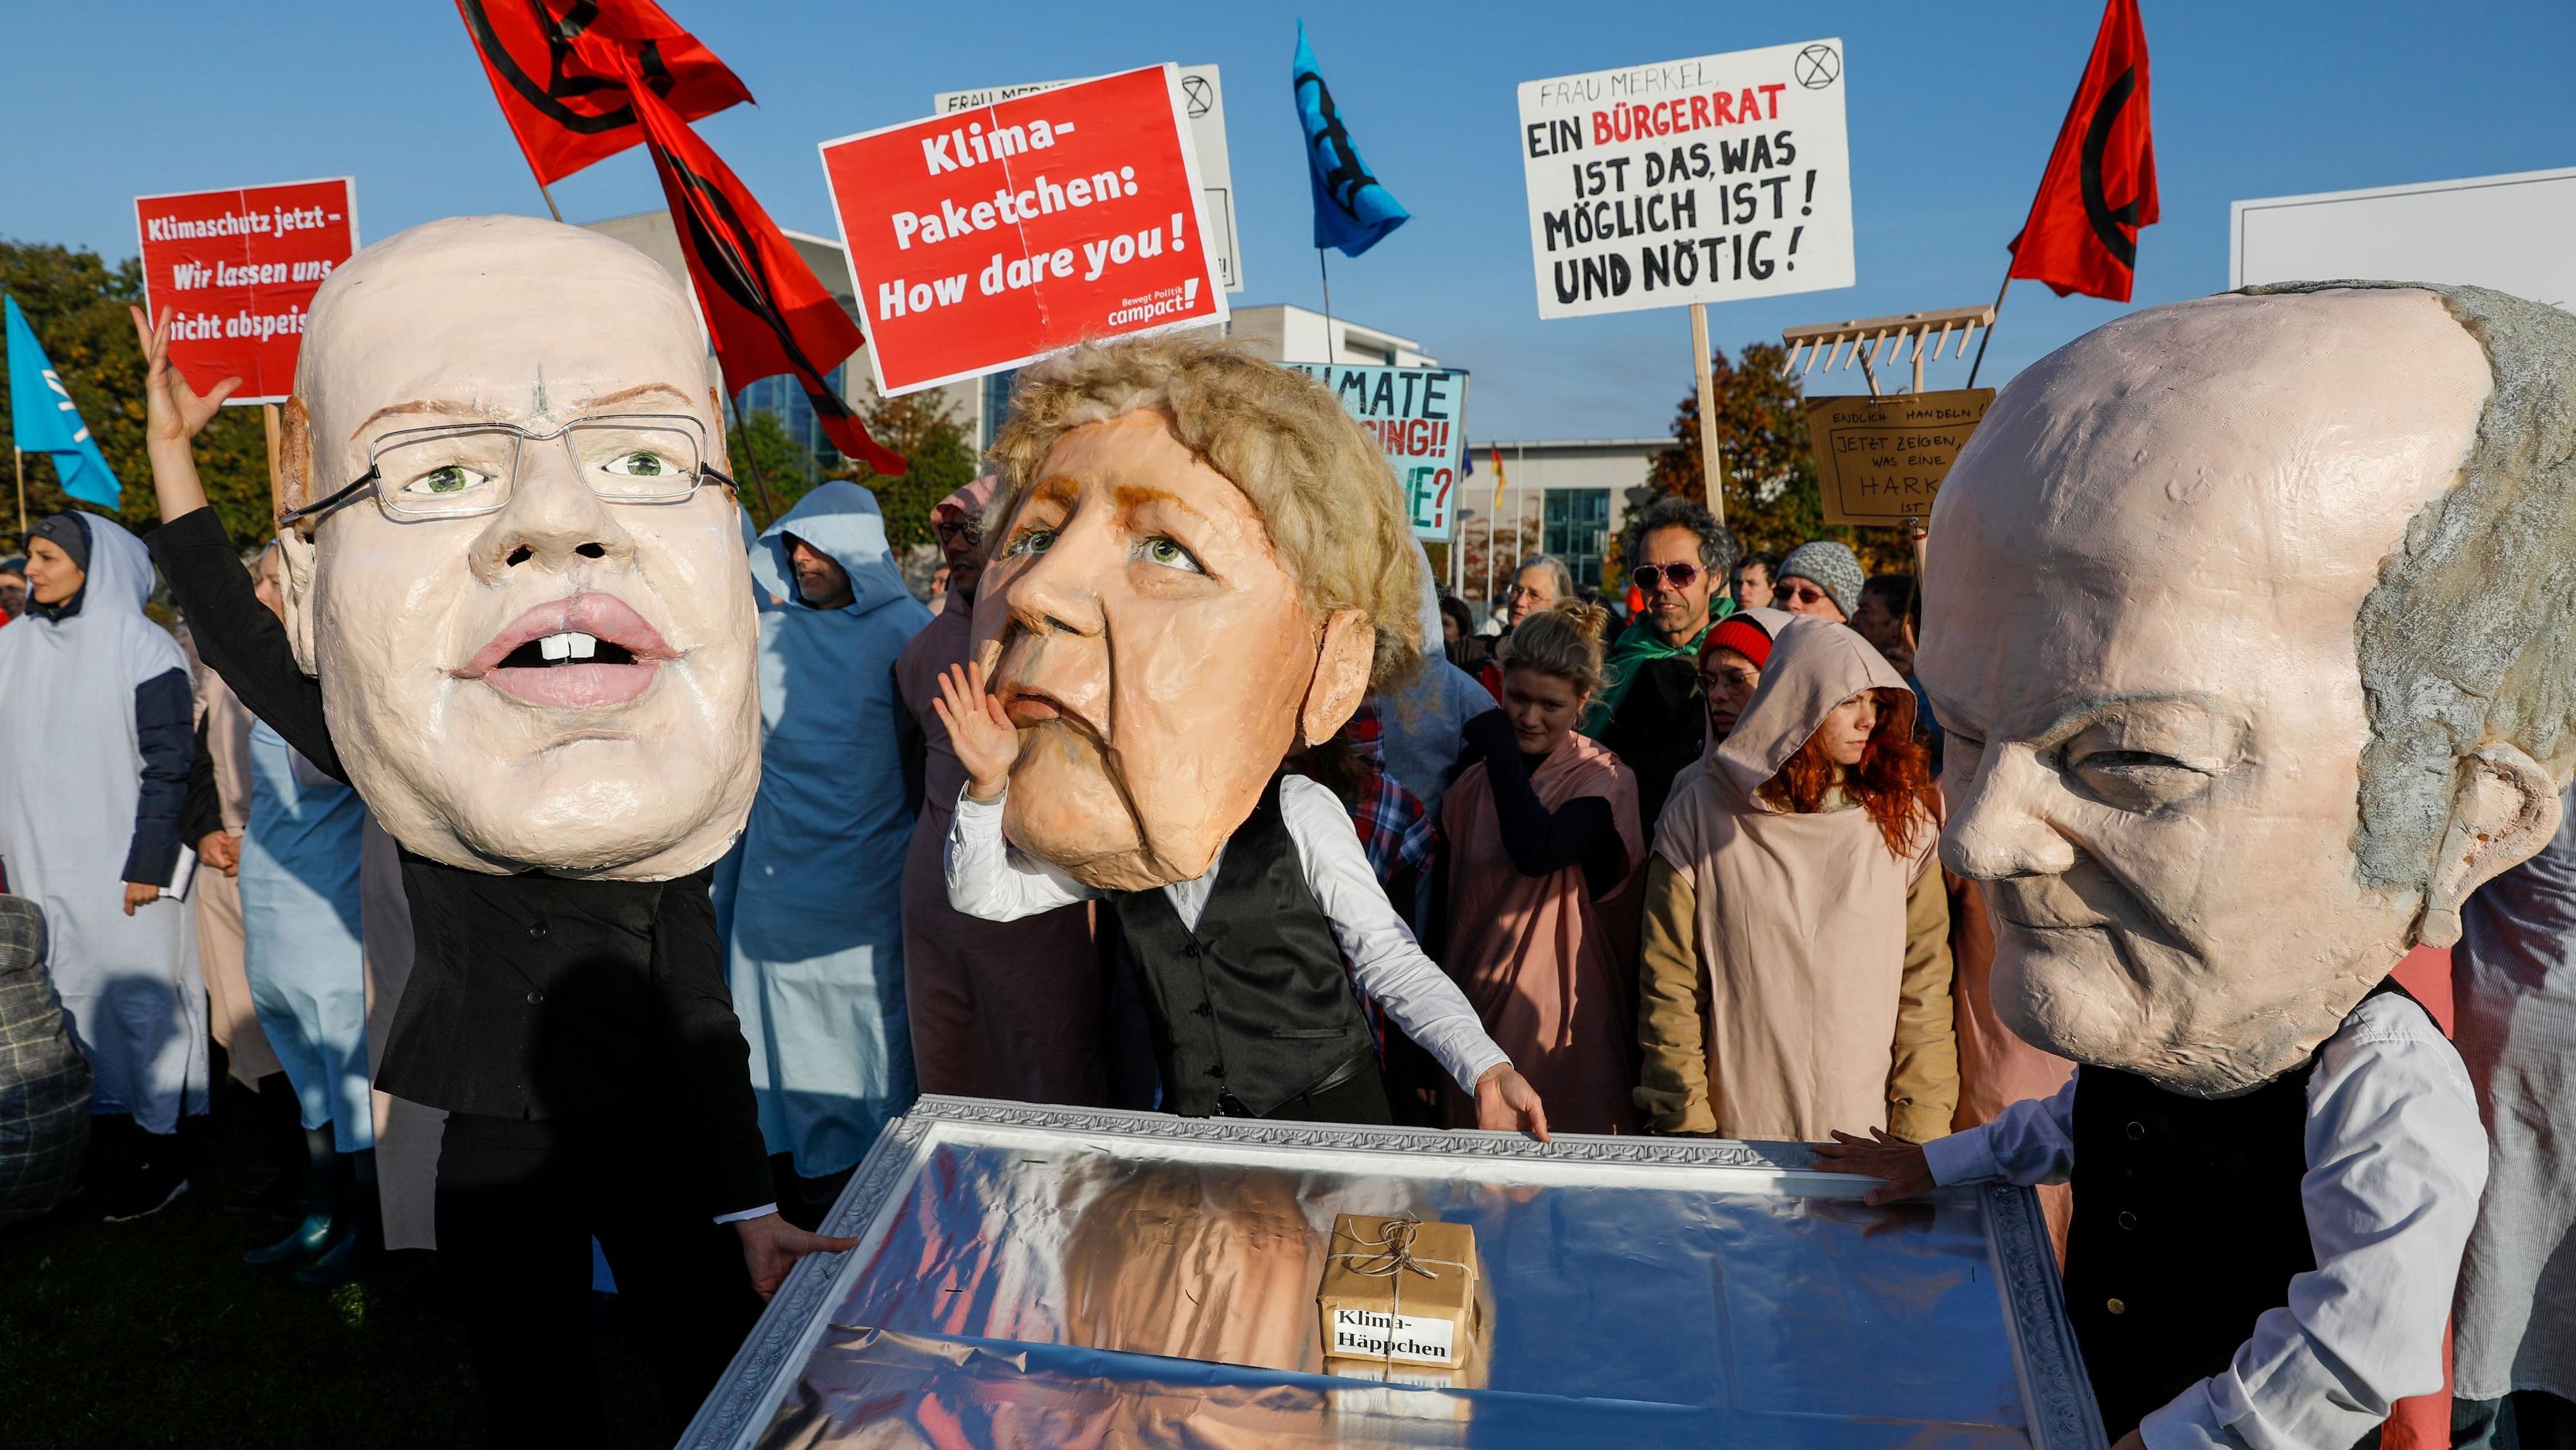 Extinction Rebellion protesters wear masks in Berlin on October 9. From left, the masks represent German Economy Minister Peter Altmaier, German Chancellor Angela Merkel and German Vice Chancellor Olaf Scholz.